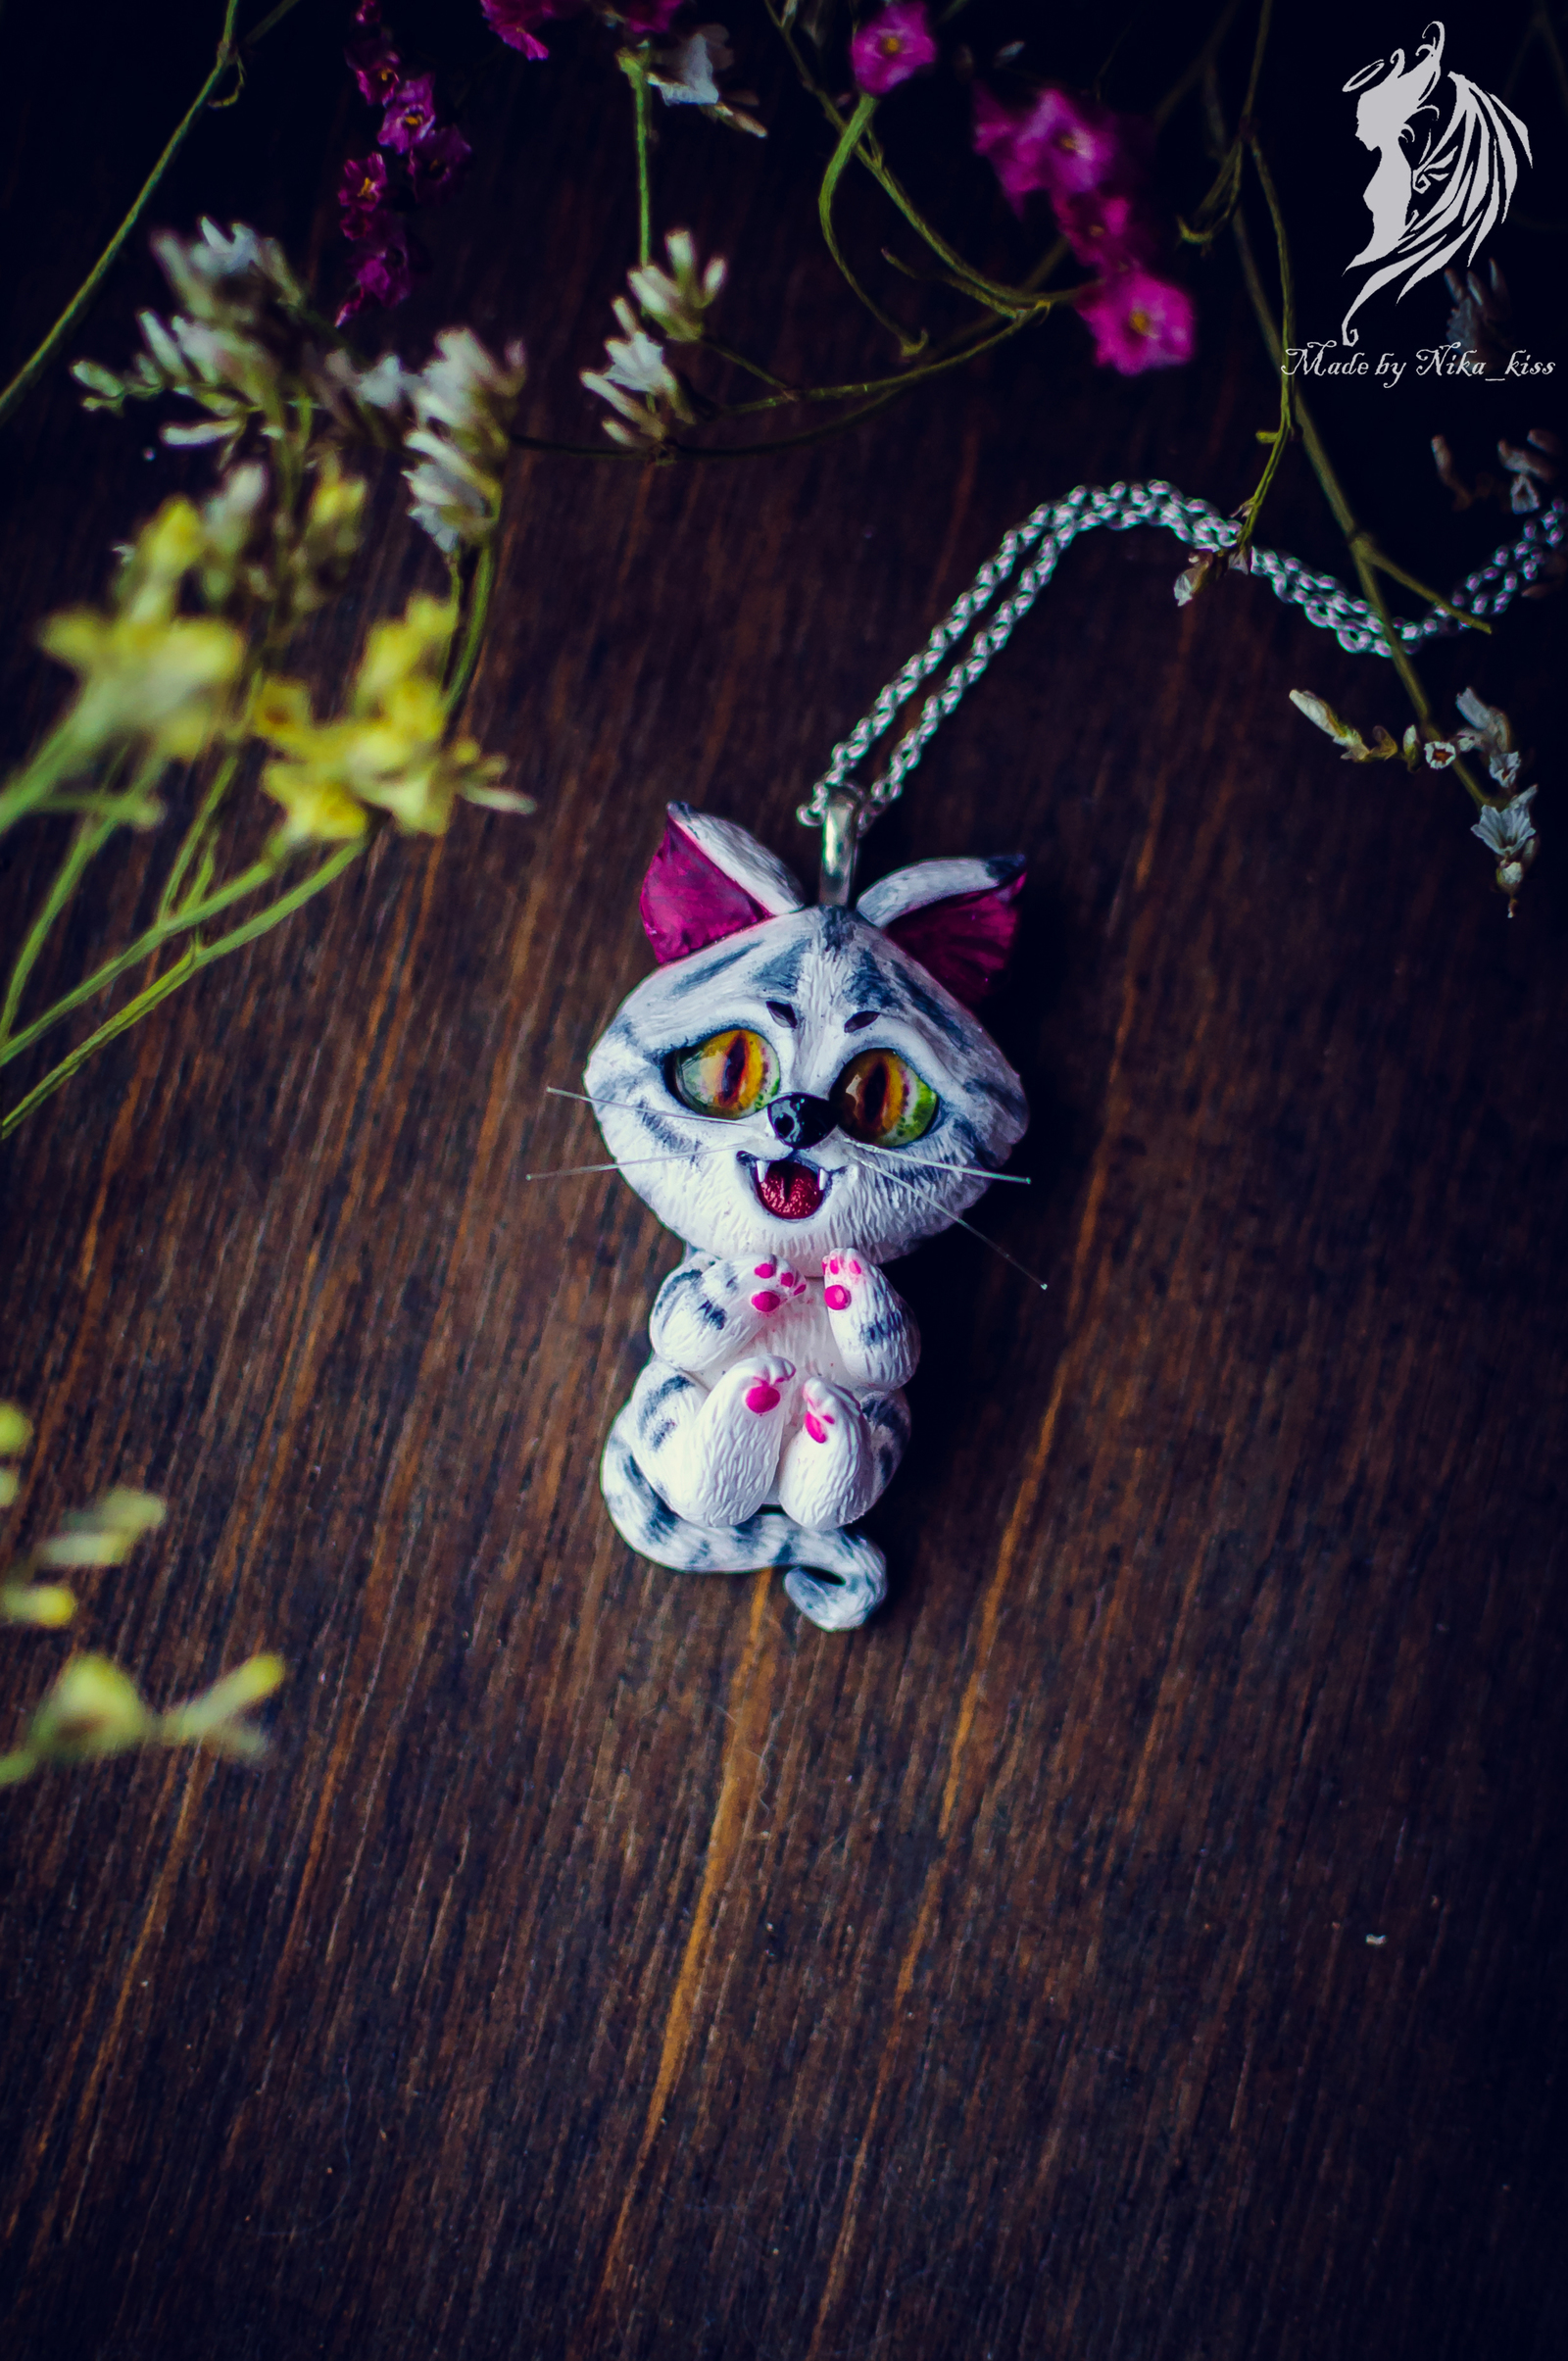 Mustachioed-striped cat made of polymer clay. - Longpost, Paws, Nika_kiss, cat, Handmade, Polymer clay, Needlework without process, My